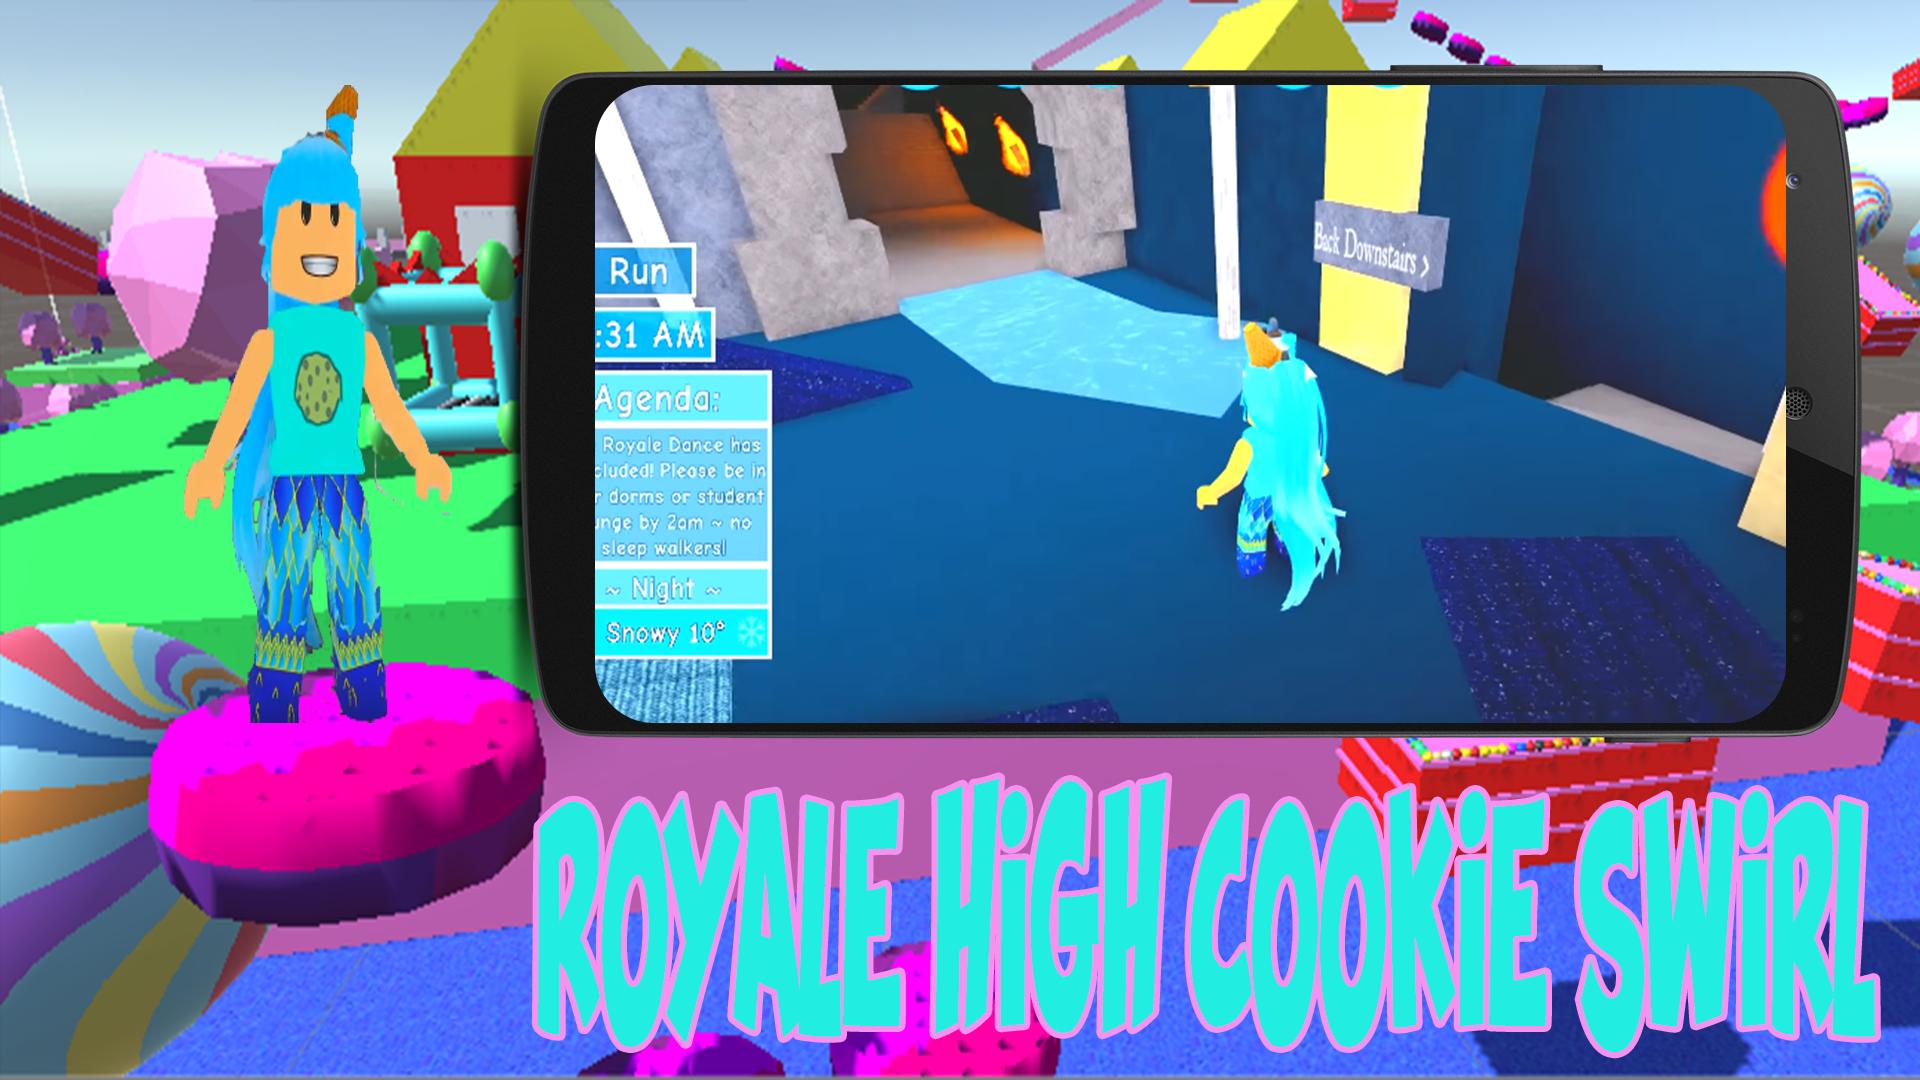 Royale High Cookie Swirl Roblox S Obby For Android Apk Download - roblox royale high cookie swirl c